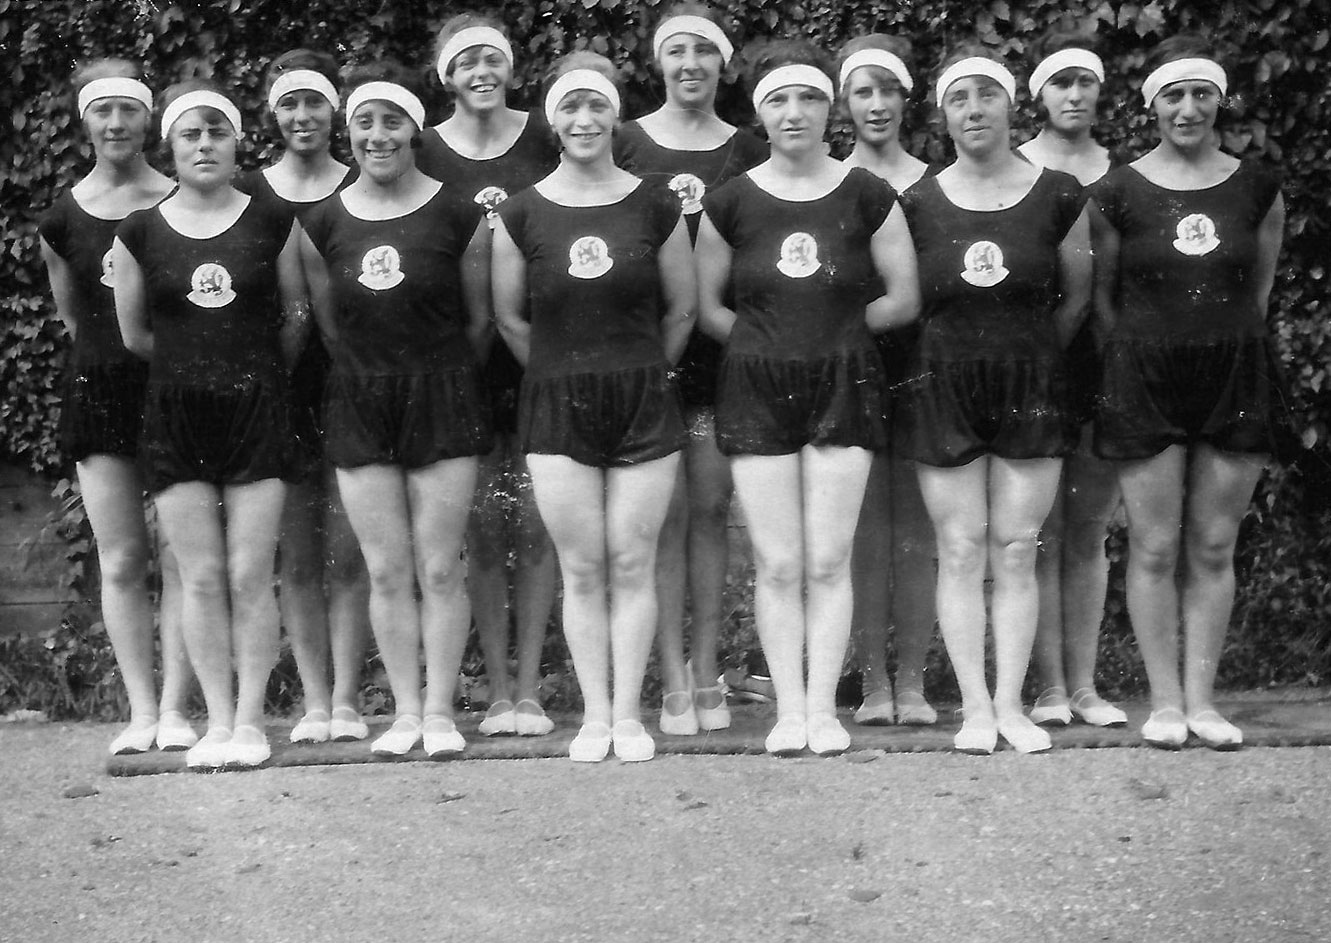 The Dutch Olympic women's gymnastics team at the Amsterdam Olympics, 1928.  The team won the gold medal.  The coach was Jewish, as were five of the team members